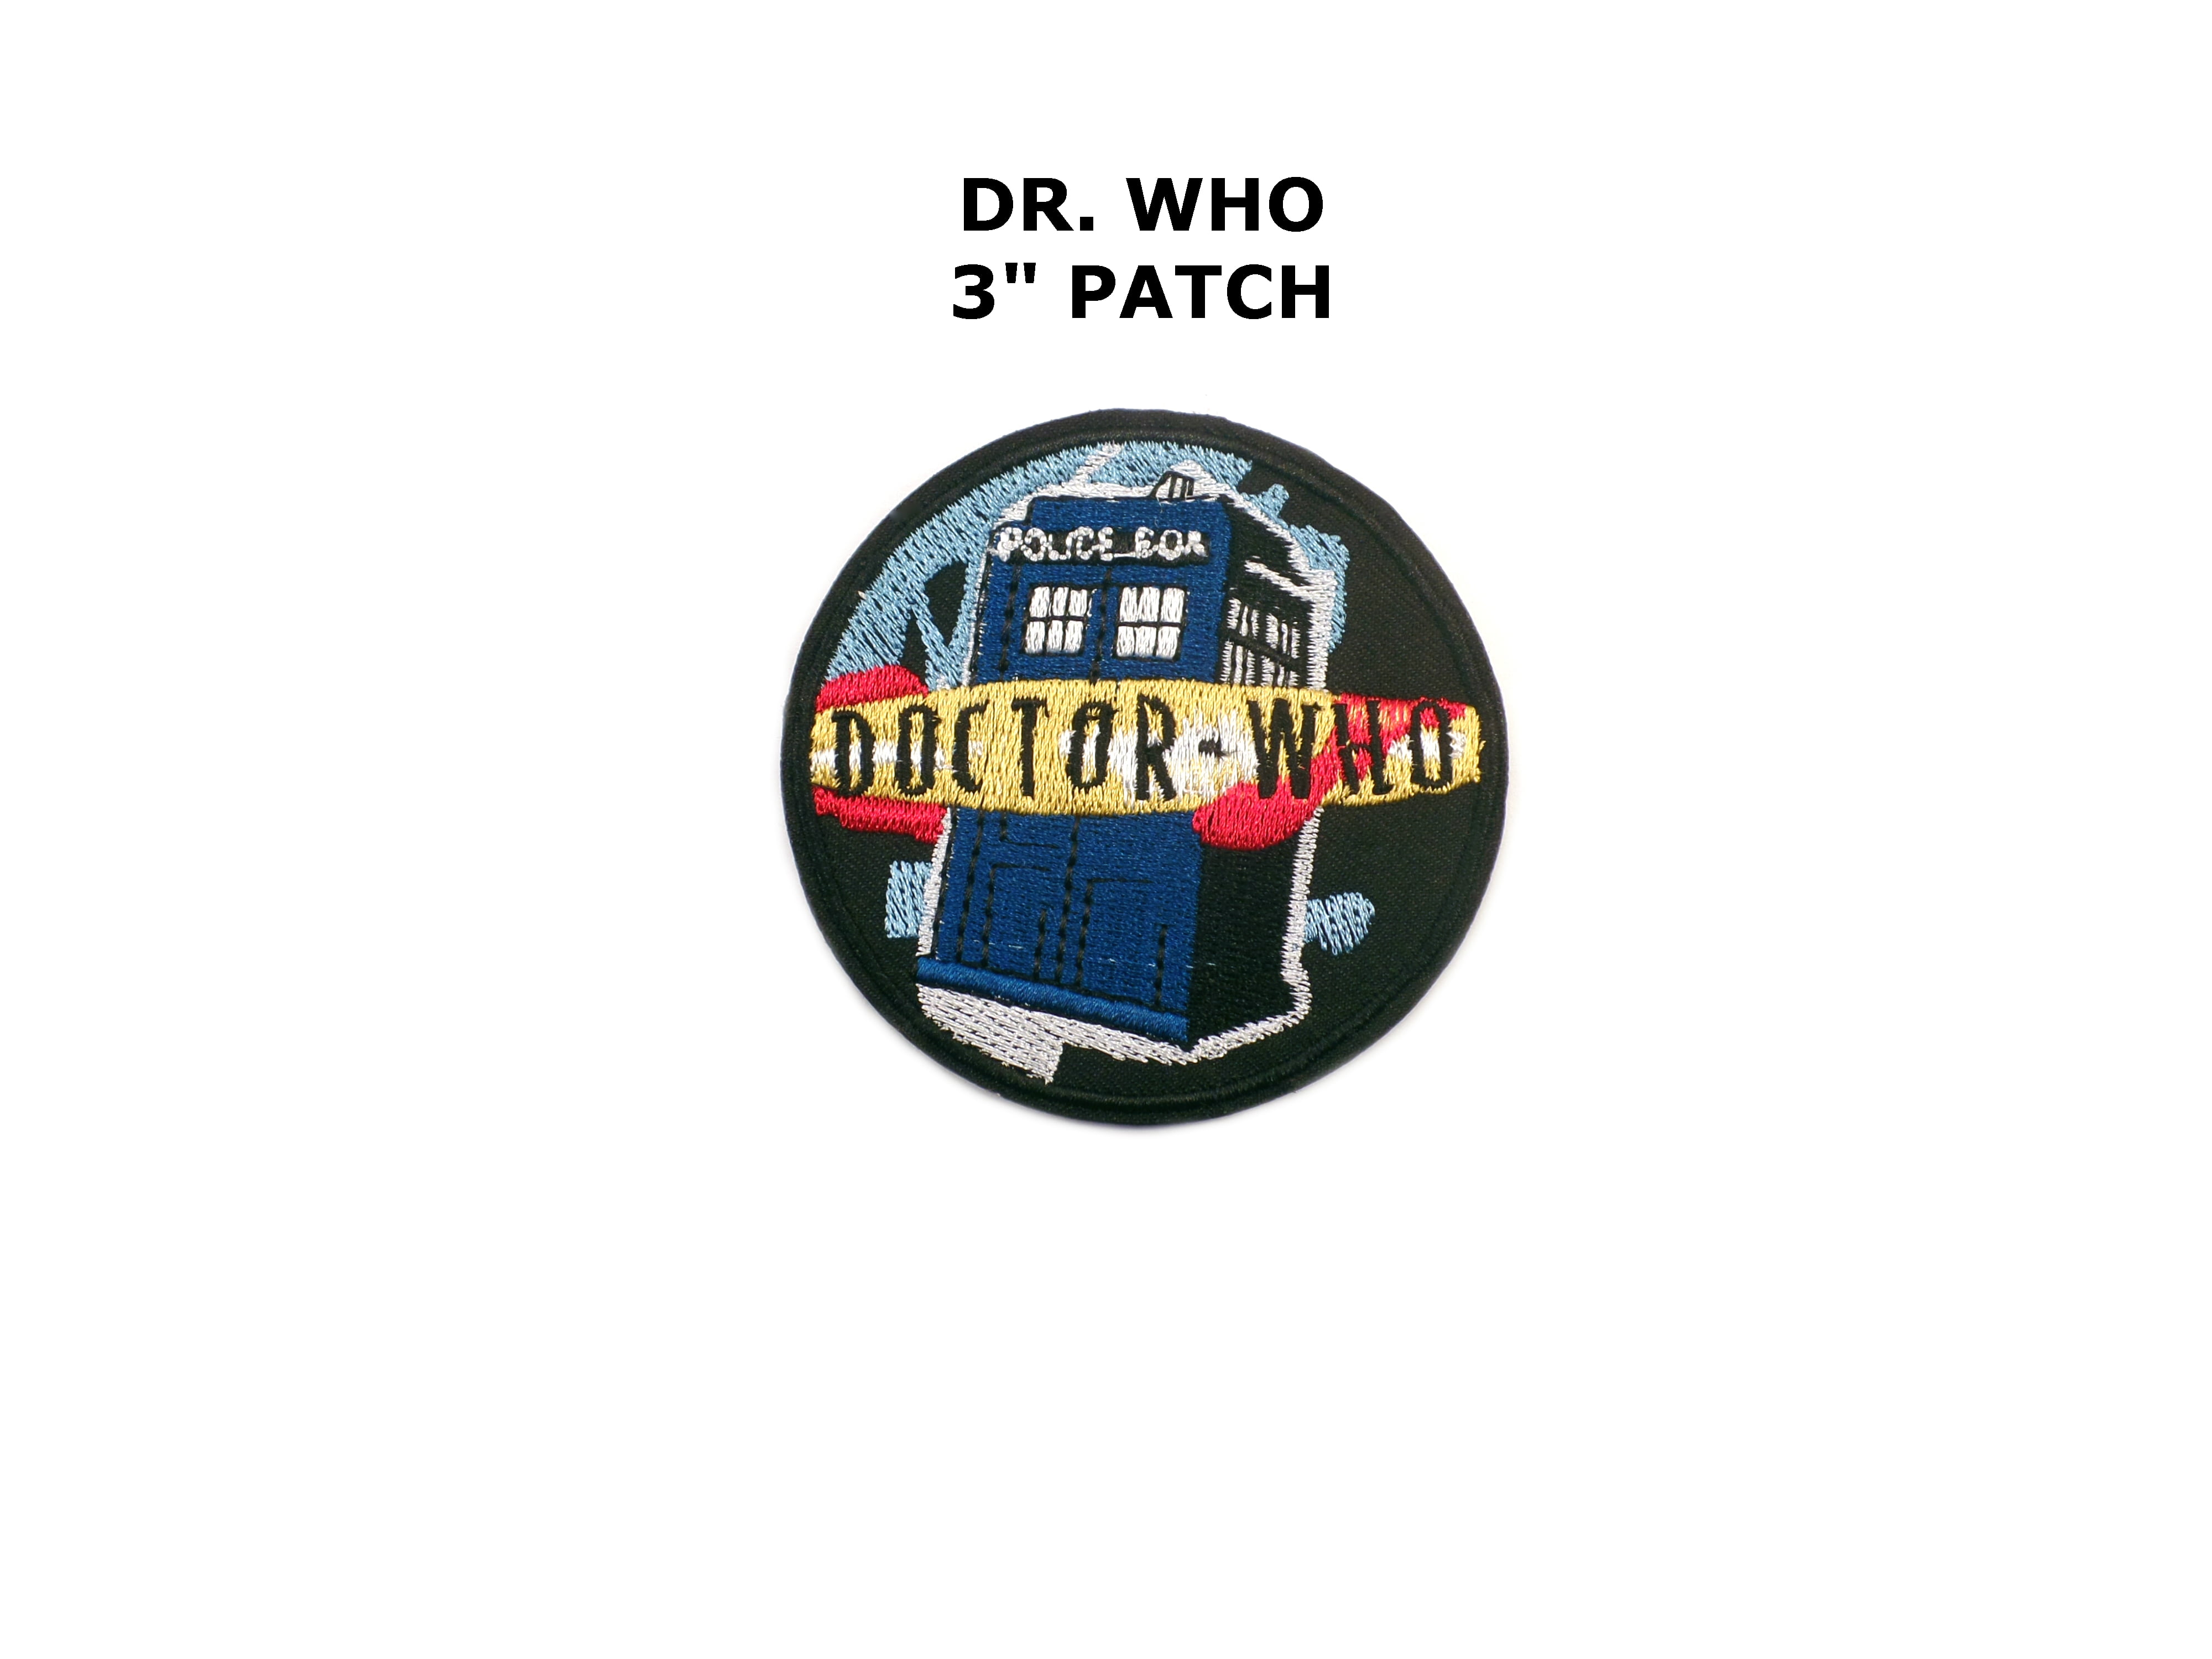 Dr Who DOCTOR WHO TARDIS DR DW SCIFI TV SHOW EMBROIDERED IRON ON APPLIQUE PATCH 3" 